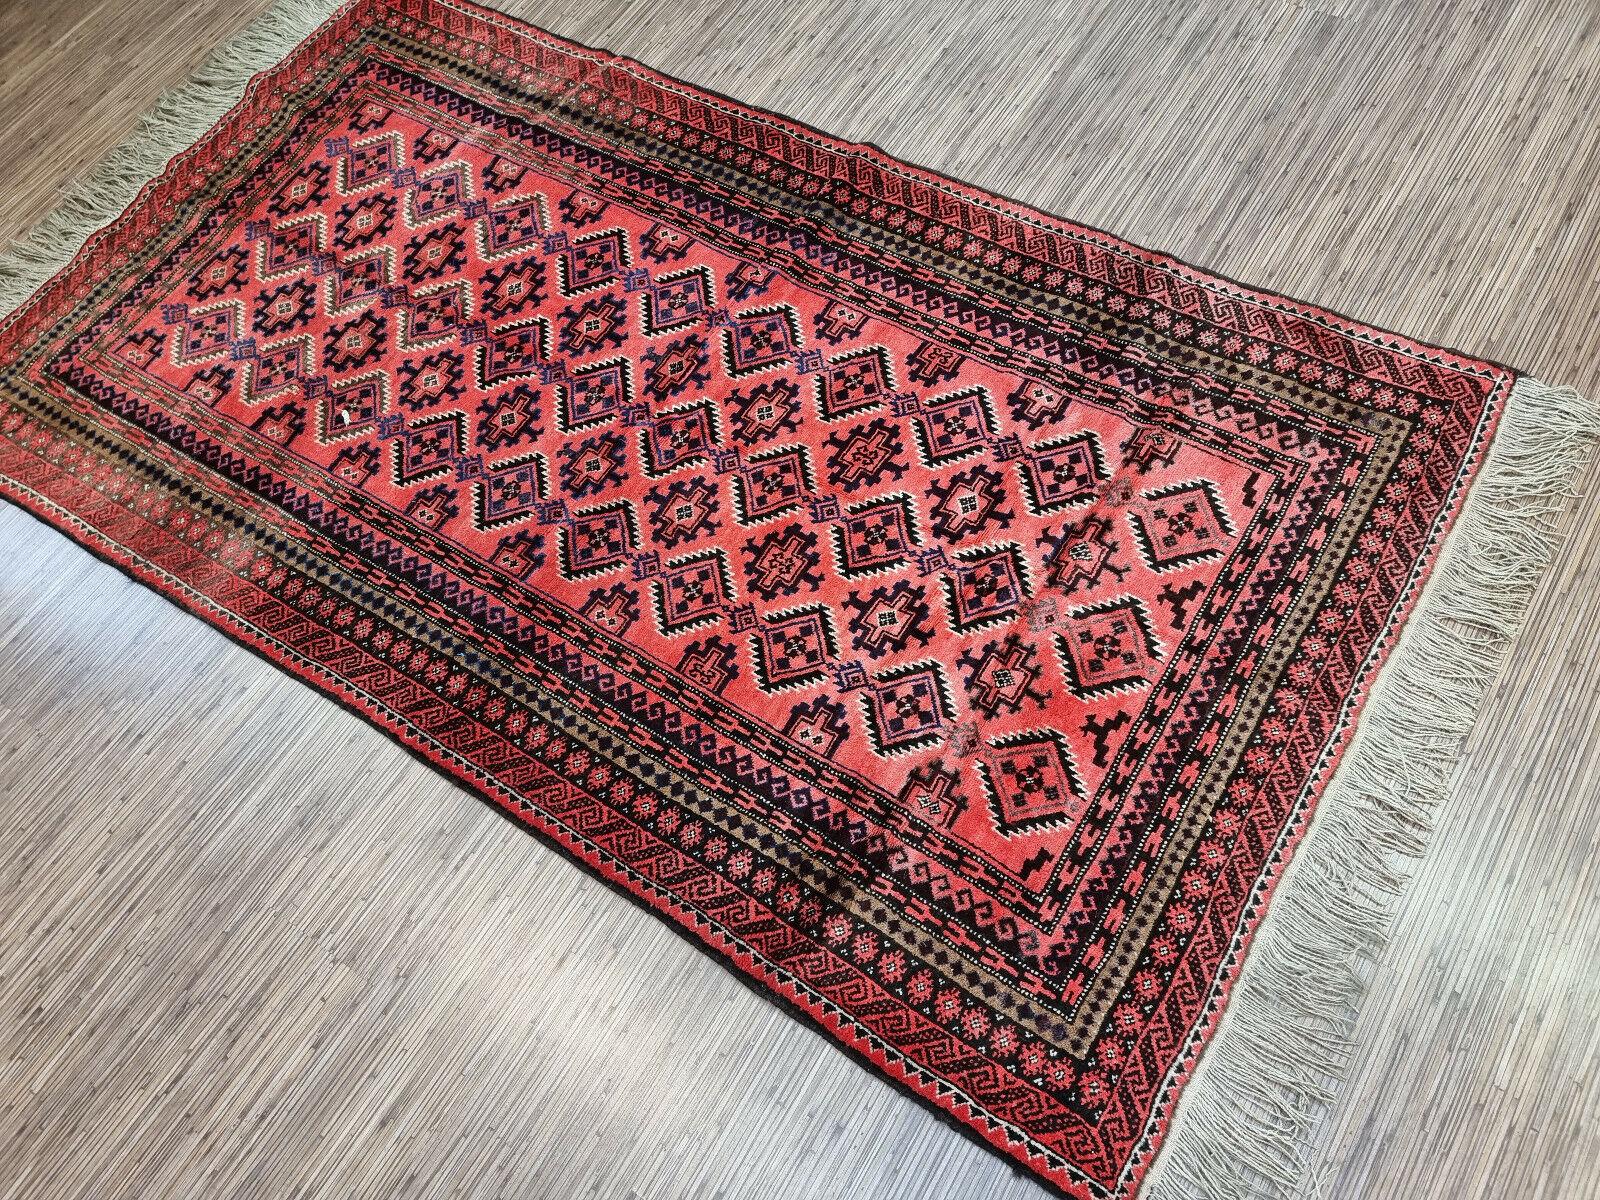 Bring home a piece of history and culture with our Handmade Vintage Afghan Baluch Prayer Rug. This stunning rug is a testament to the skill and craftsmanship of the Afghan Baluch people, who have been weaving rugs for centuries. This rug dates back